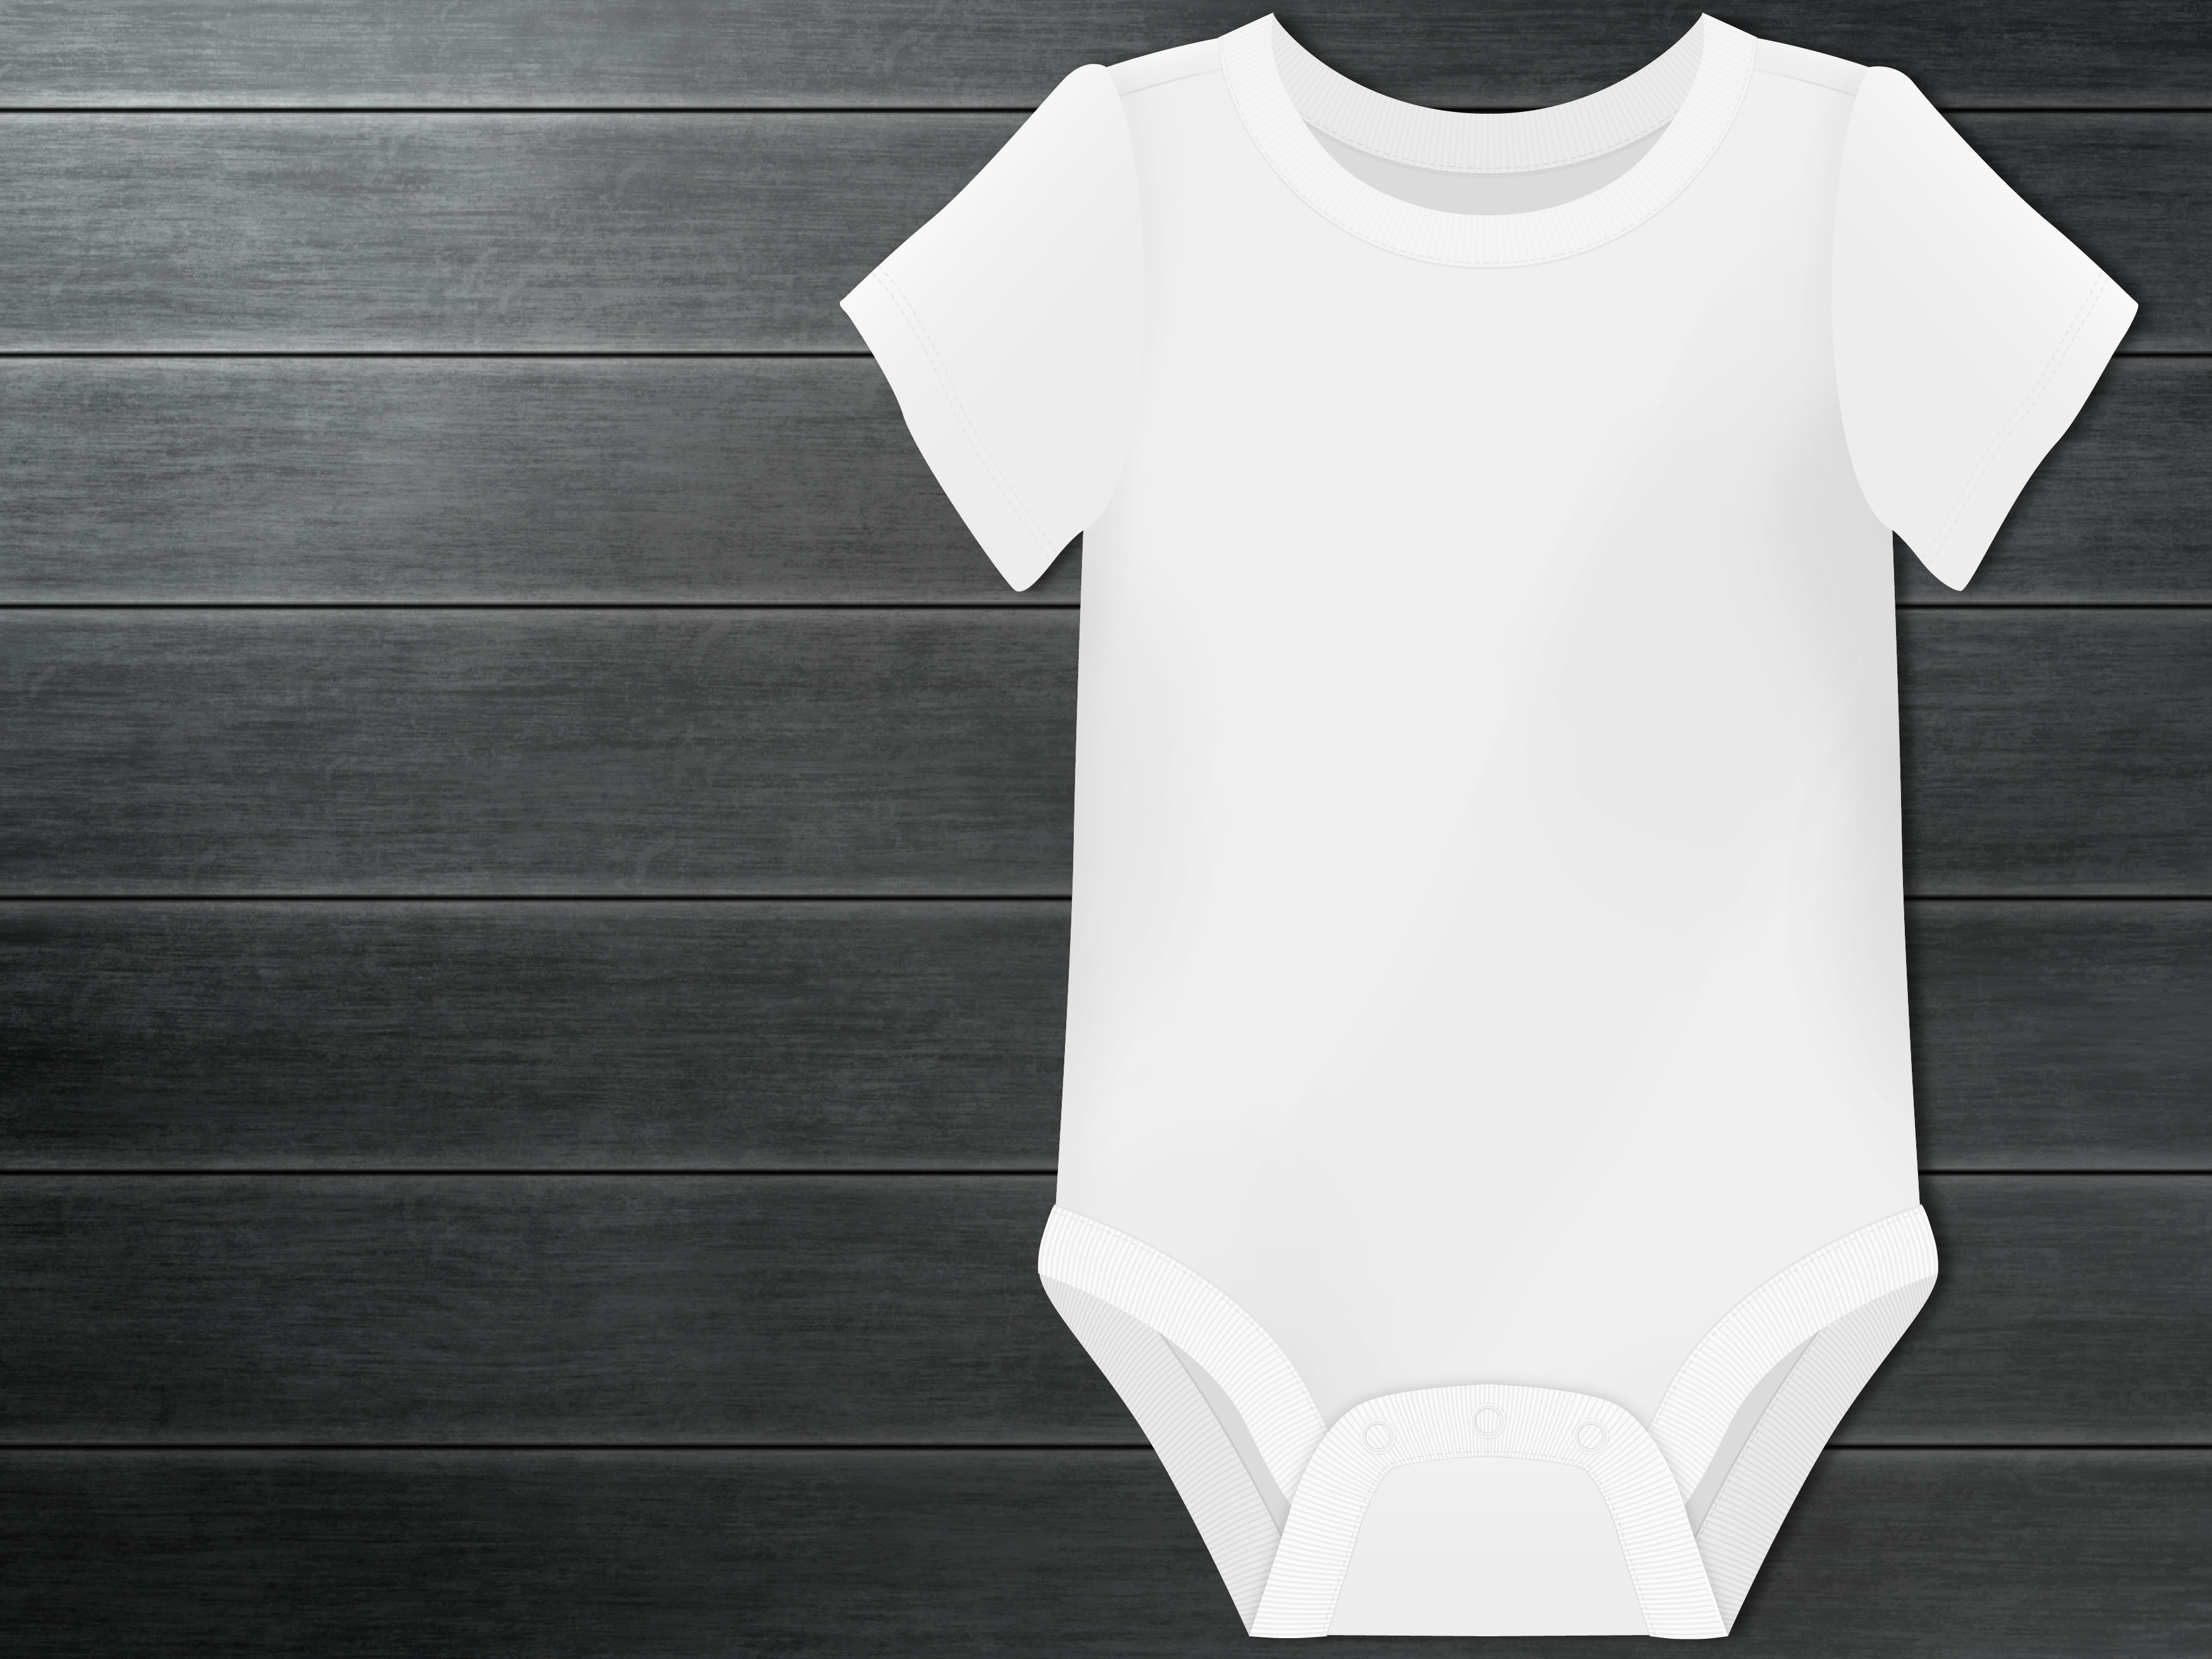 Download Get Baby Bodysuit Mockup Pics Yellowimages - Free PSD ...